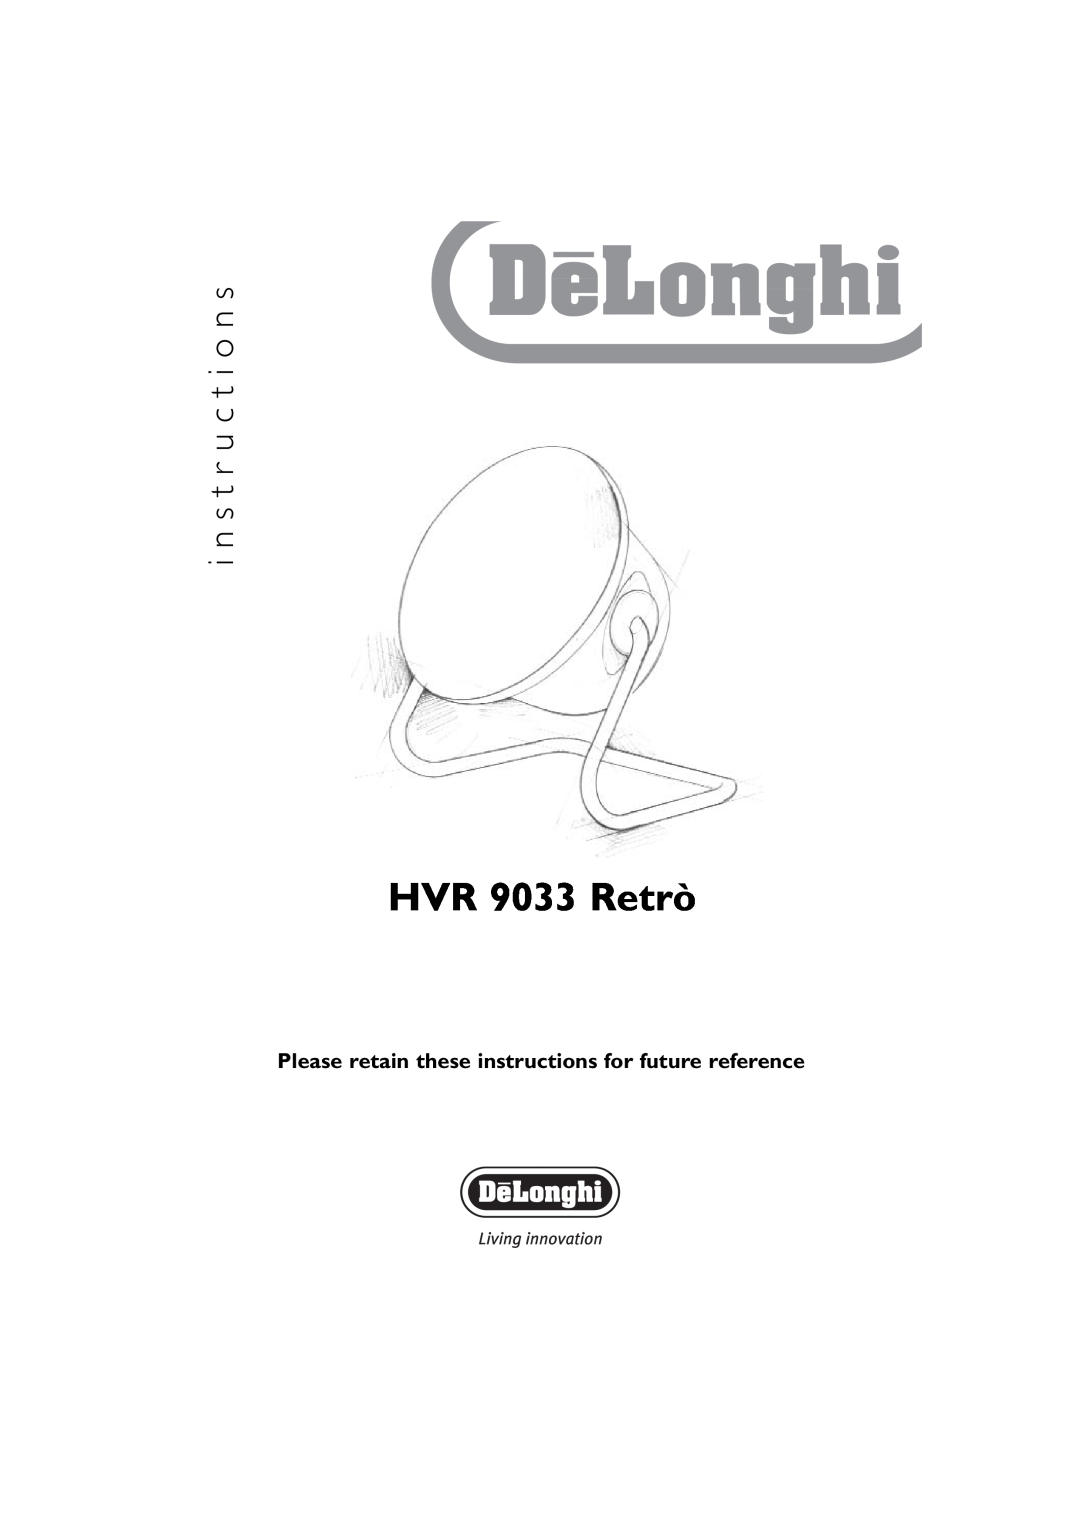 DeLonghi manual HVR 9033 Retrò, i n s t r u c t i o n s, Please retain these instructions for future reference 